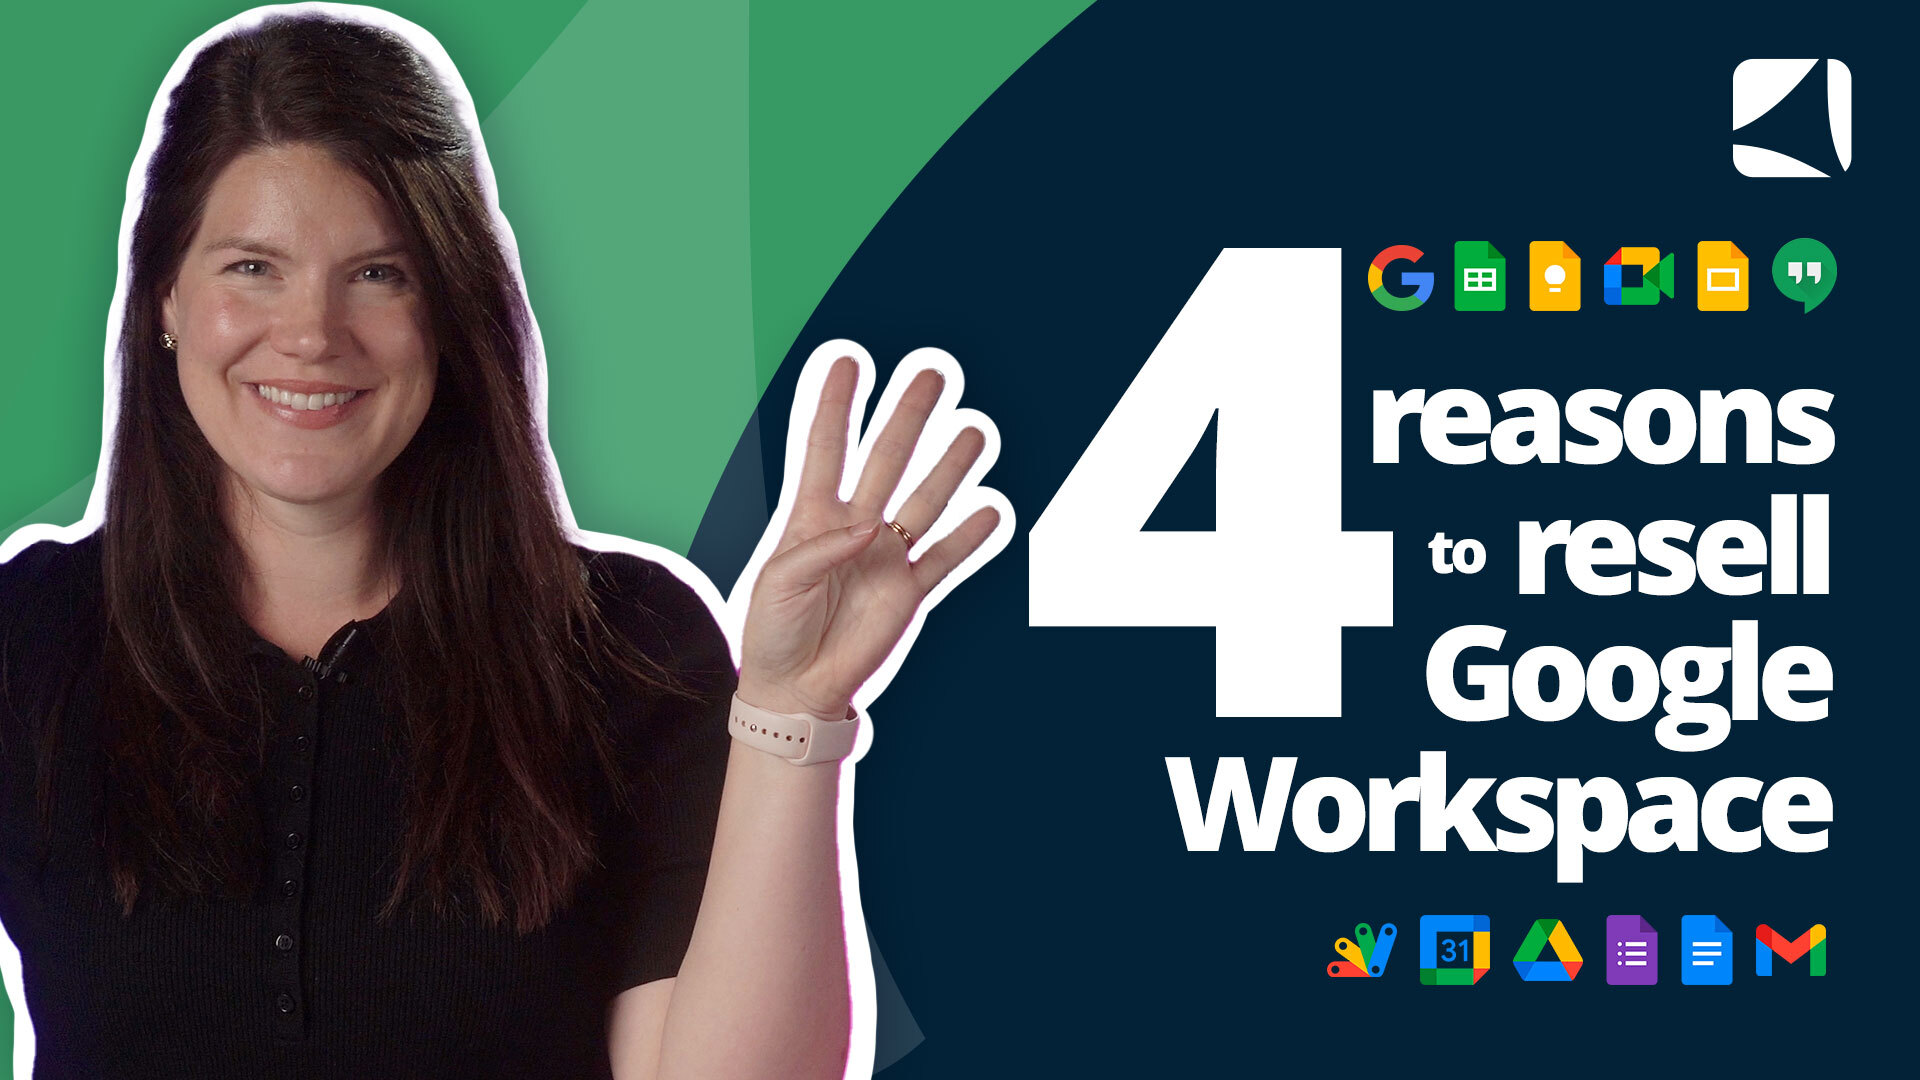 4-reasons-to-resell-Google-Workspace-YouTube-Thumbnail